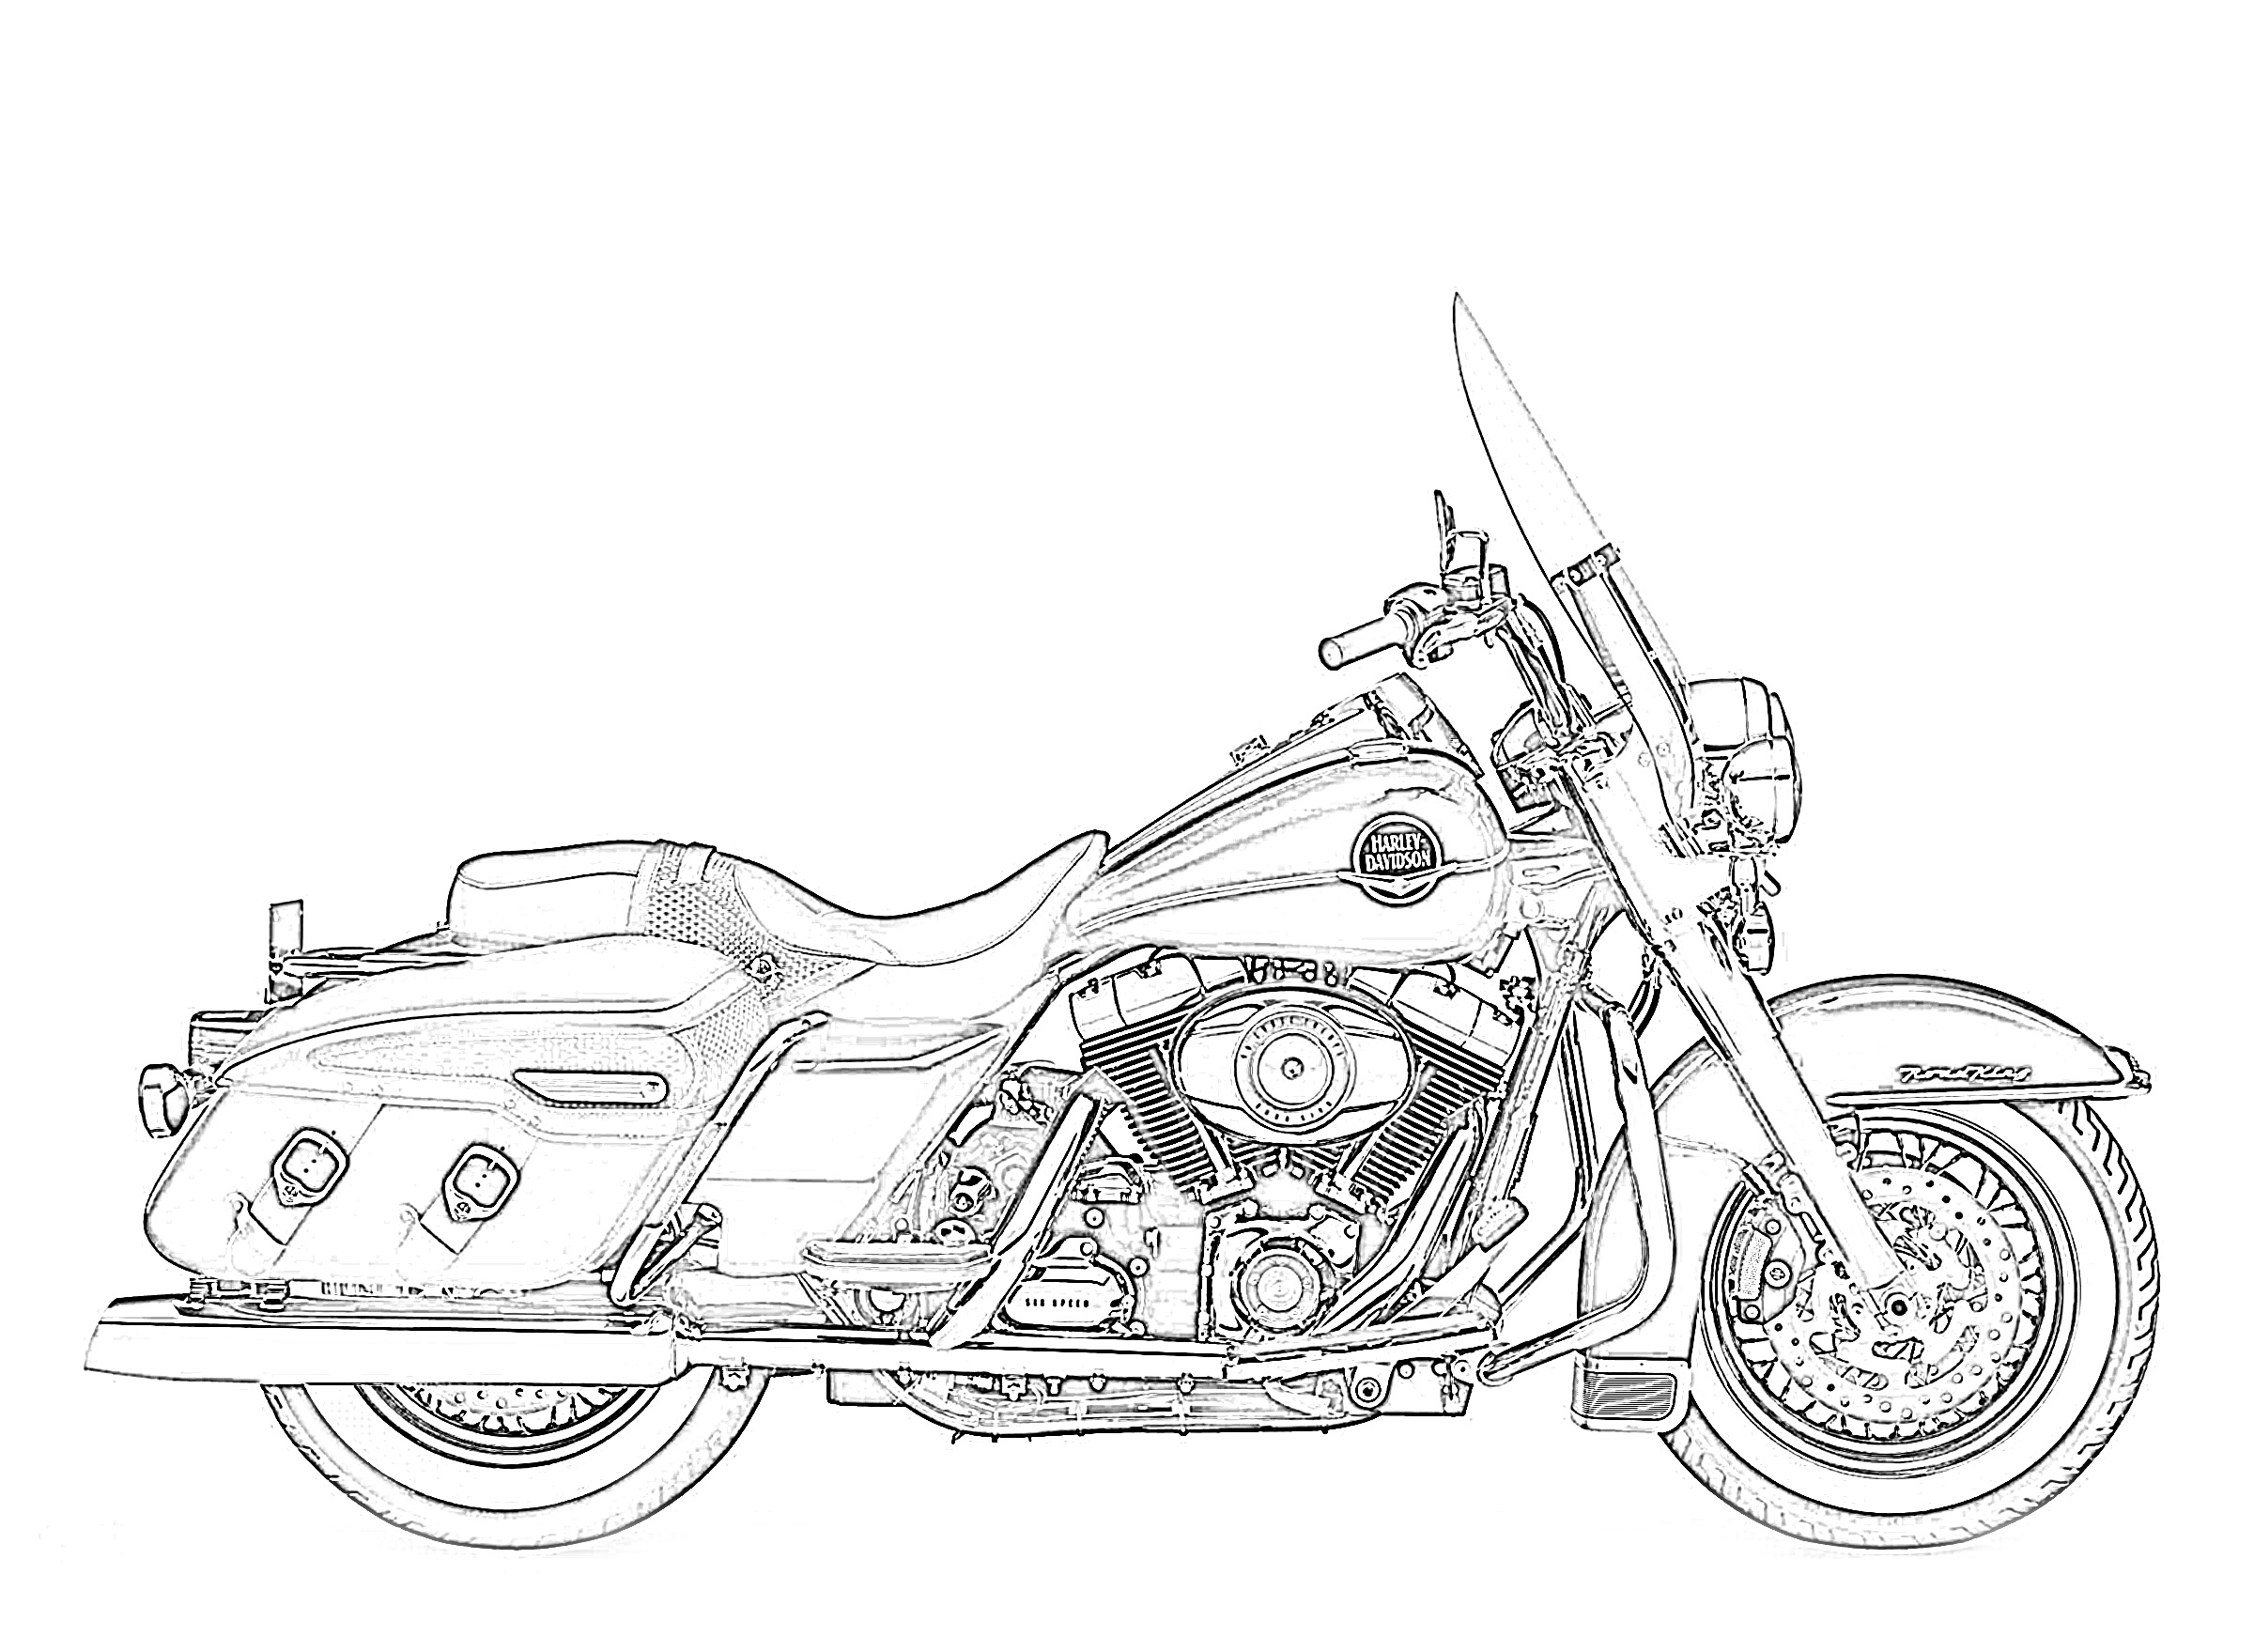 Harley Davidson road king sideview coloring page